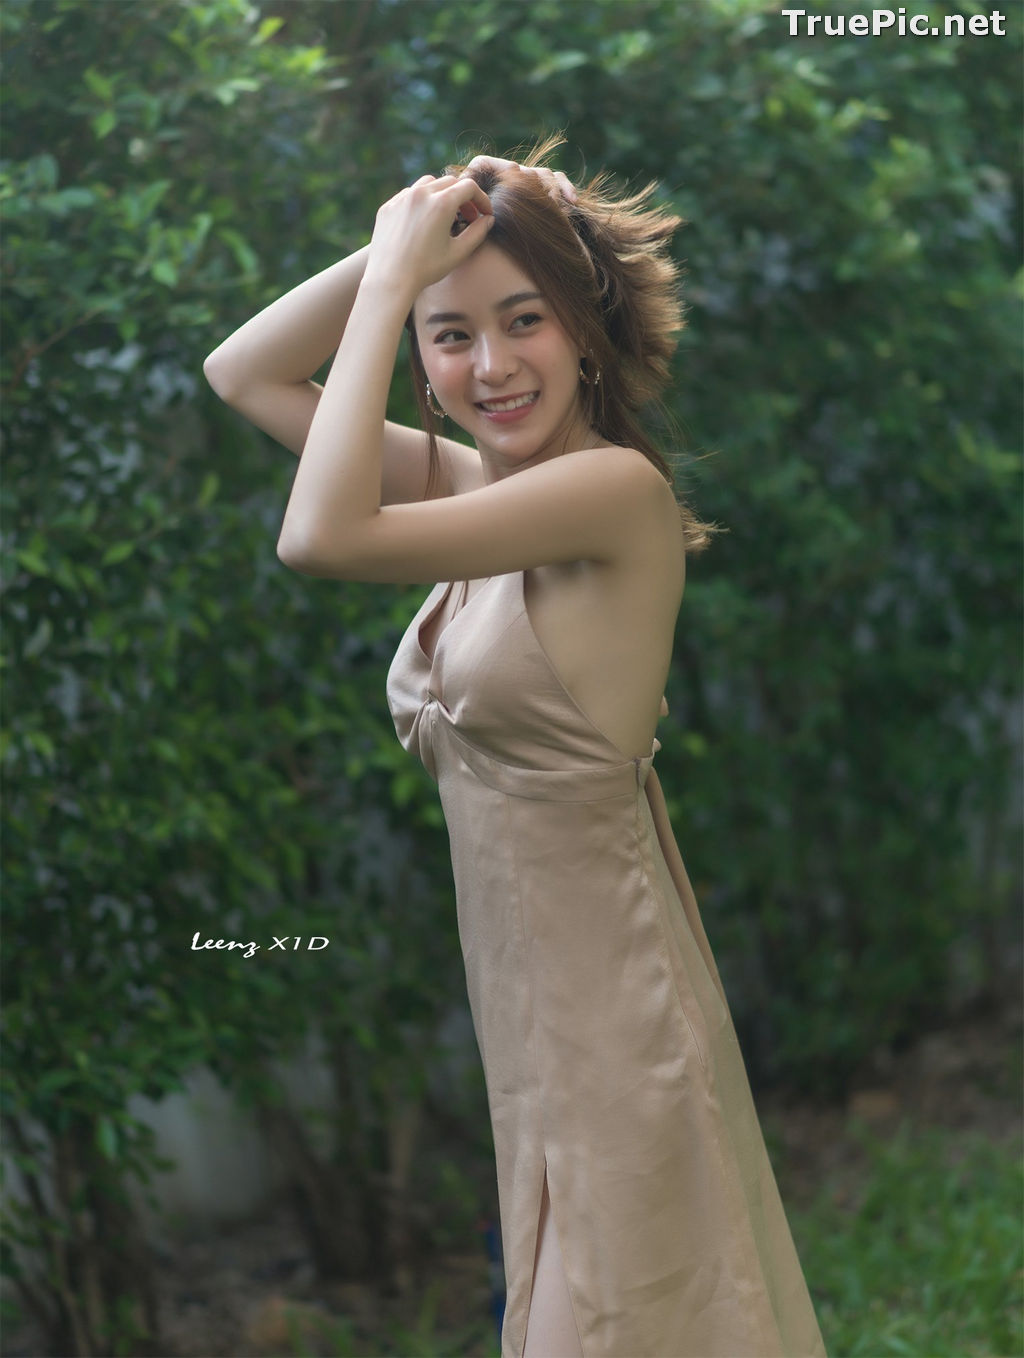 Image Thailand Model - Aee Nipapornn - I Saw The Angel's Smile - TruePic.net - Picture-5